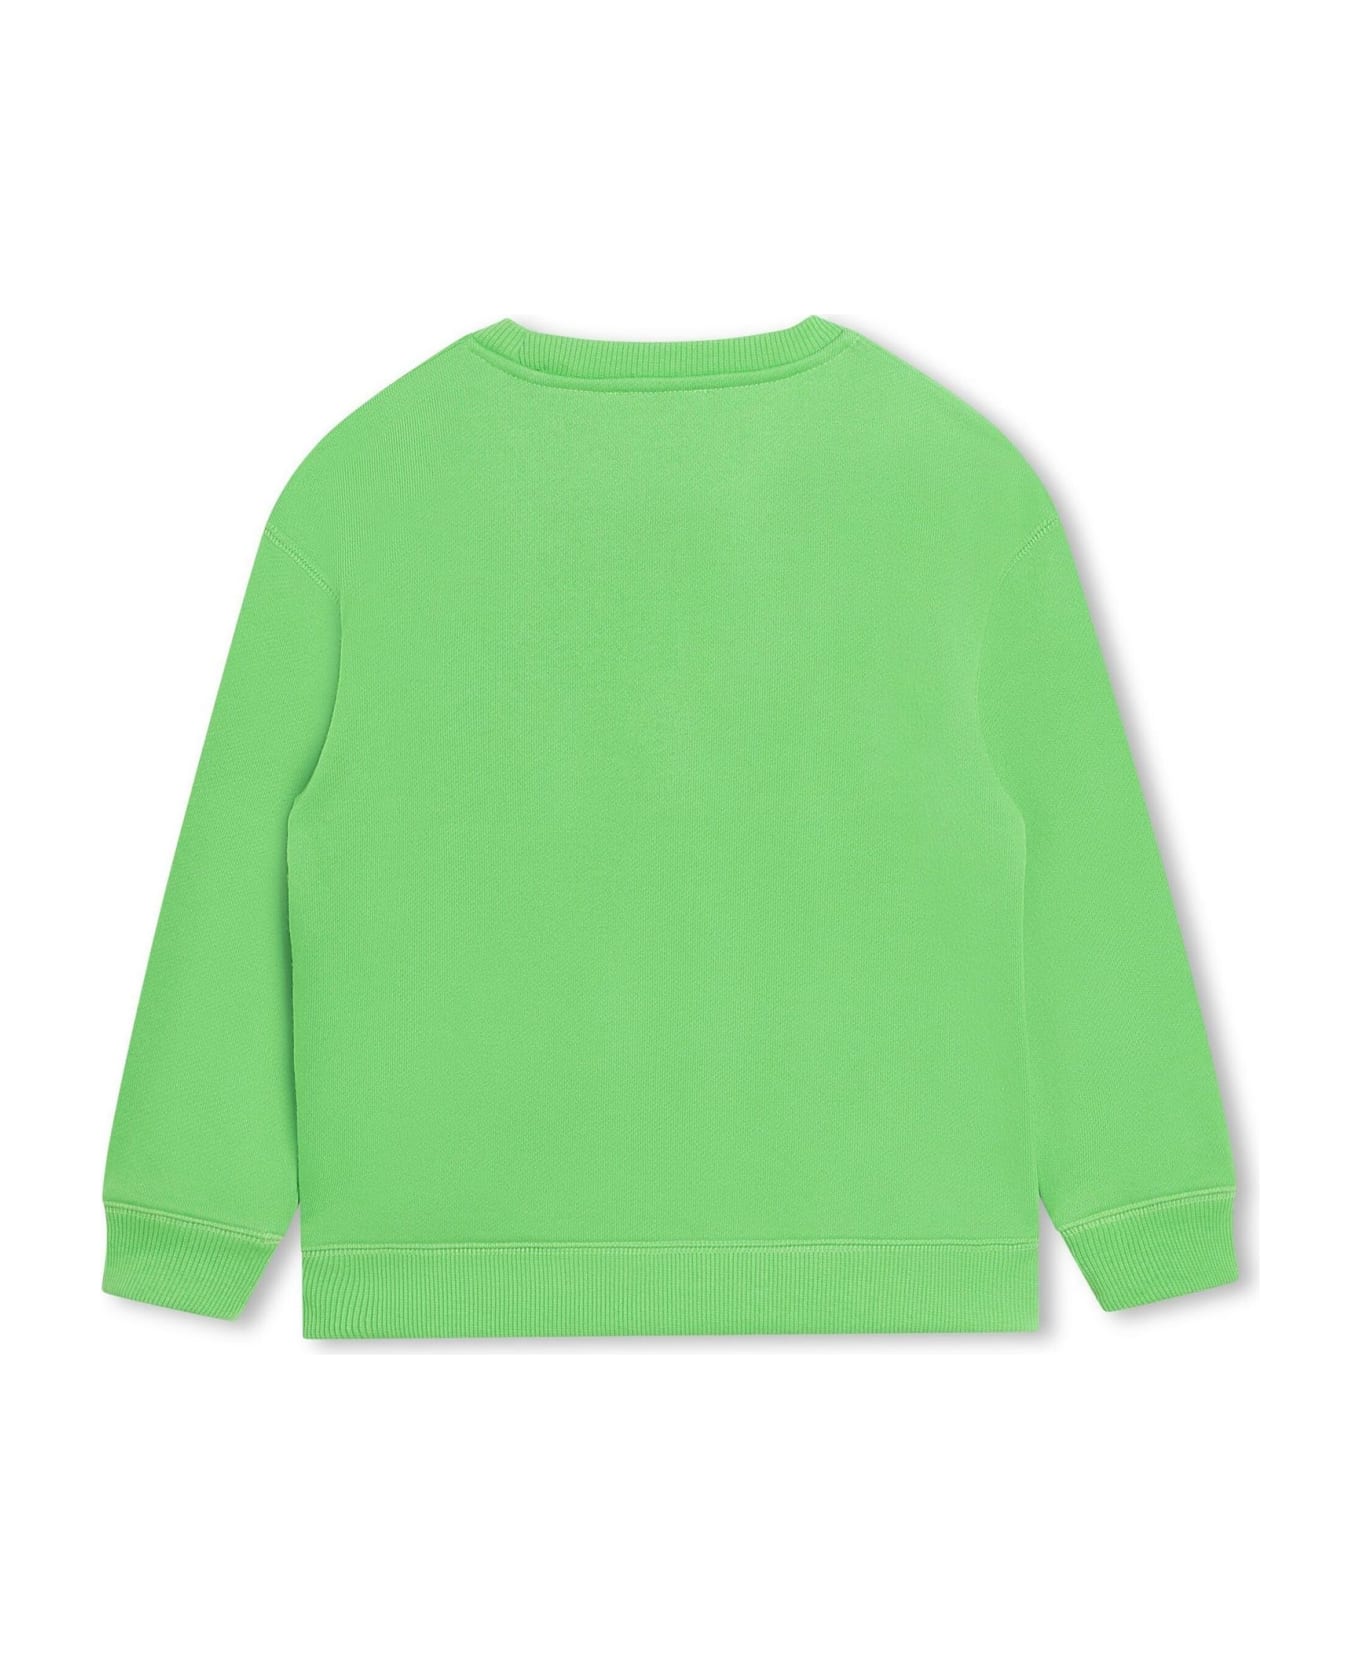 Marc Jacobs Sweaters Green - Green